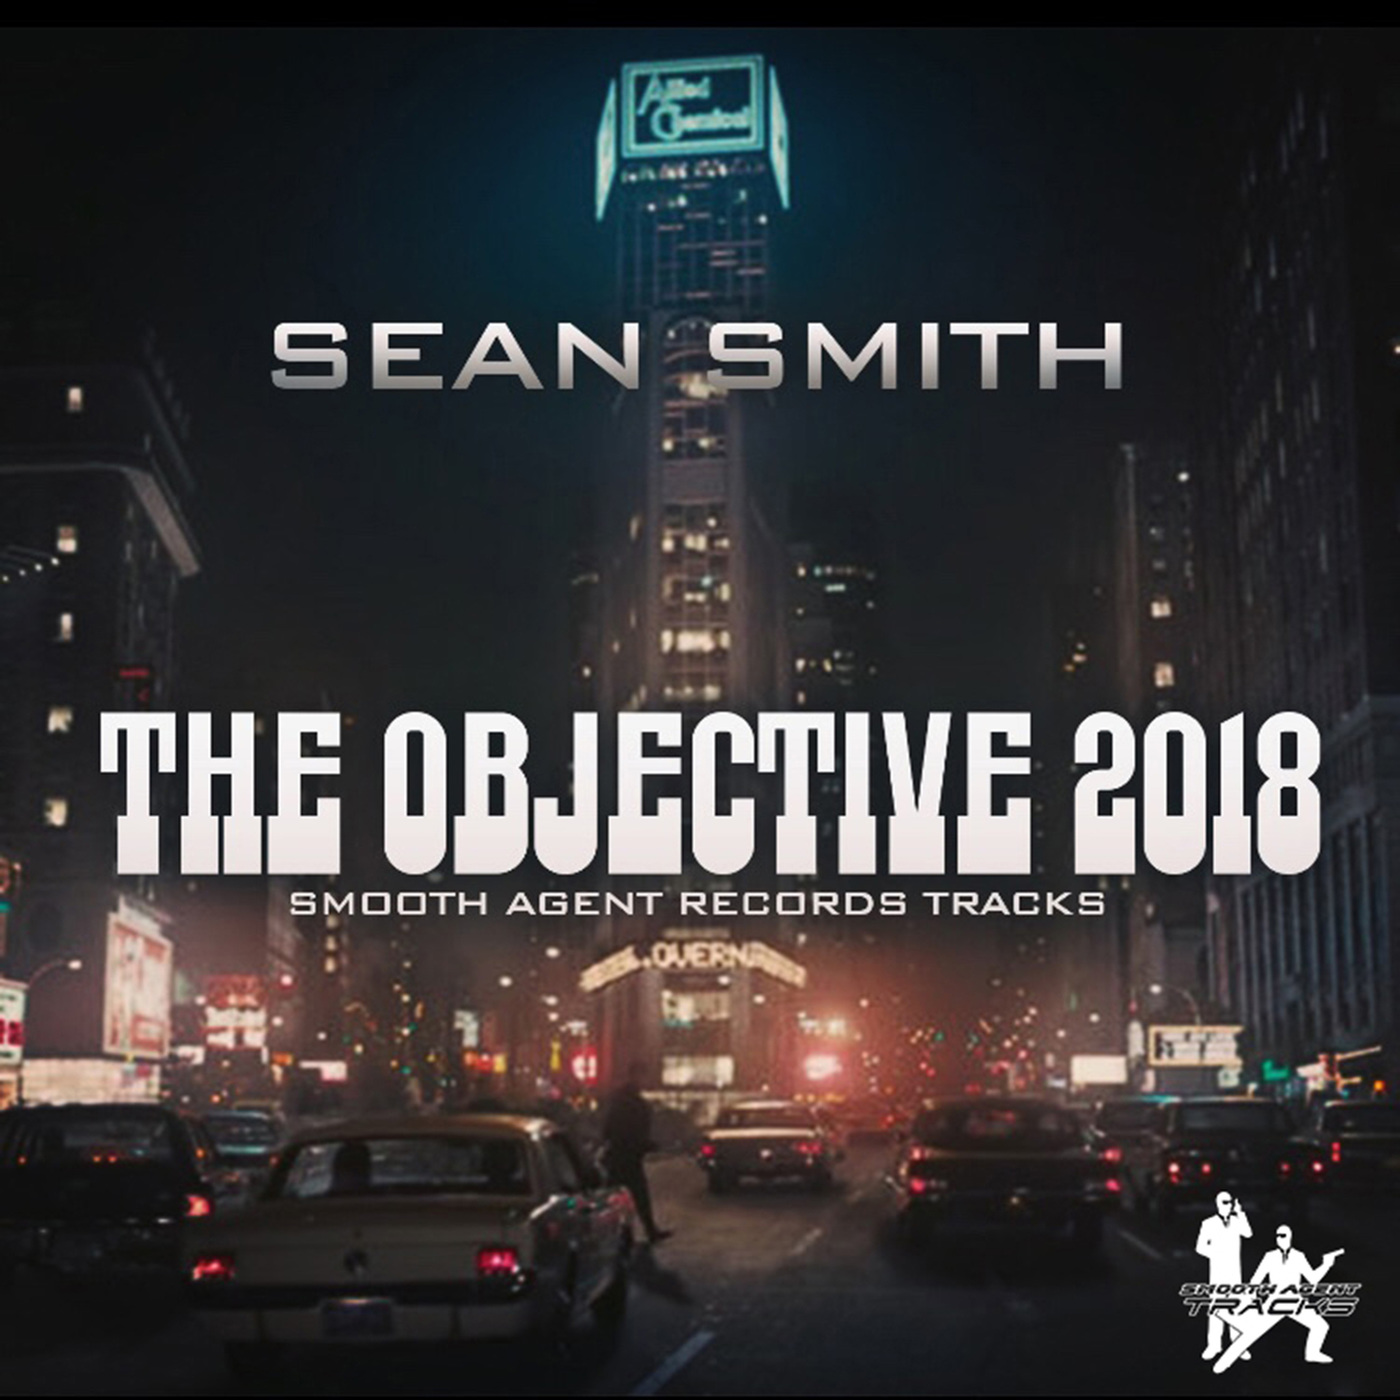 Sean Smith - The Objective 2018 / Smooth Agent Records Tracks